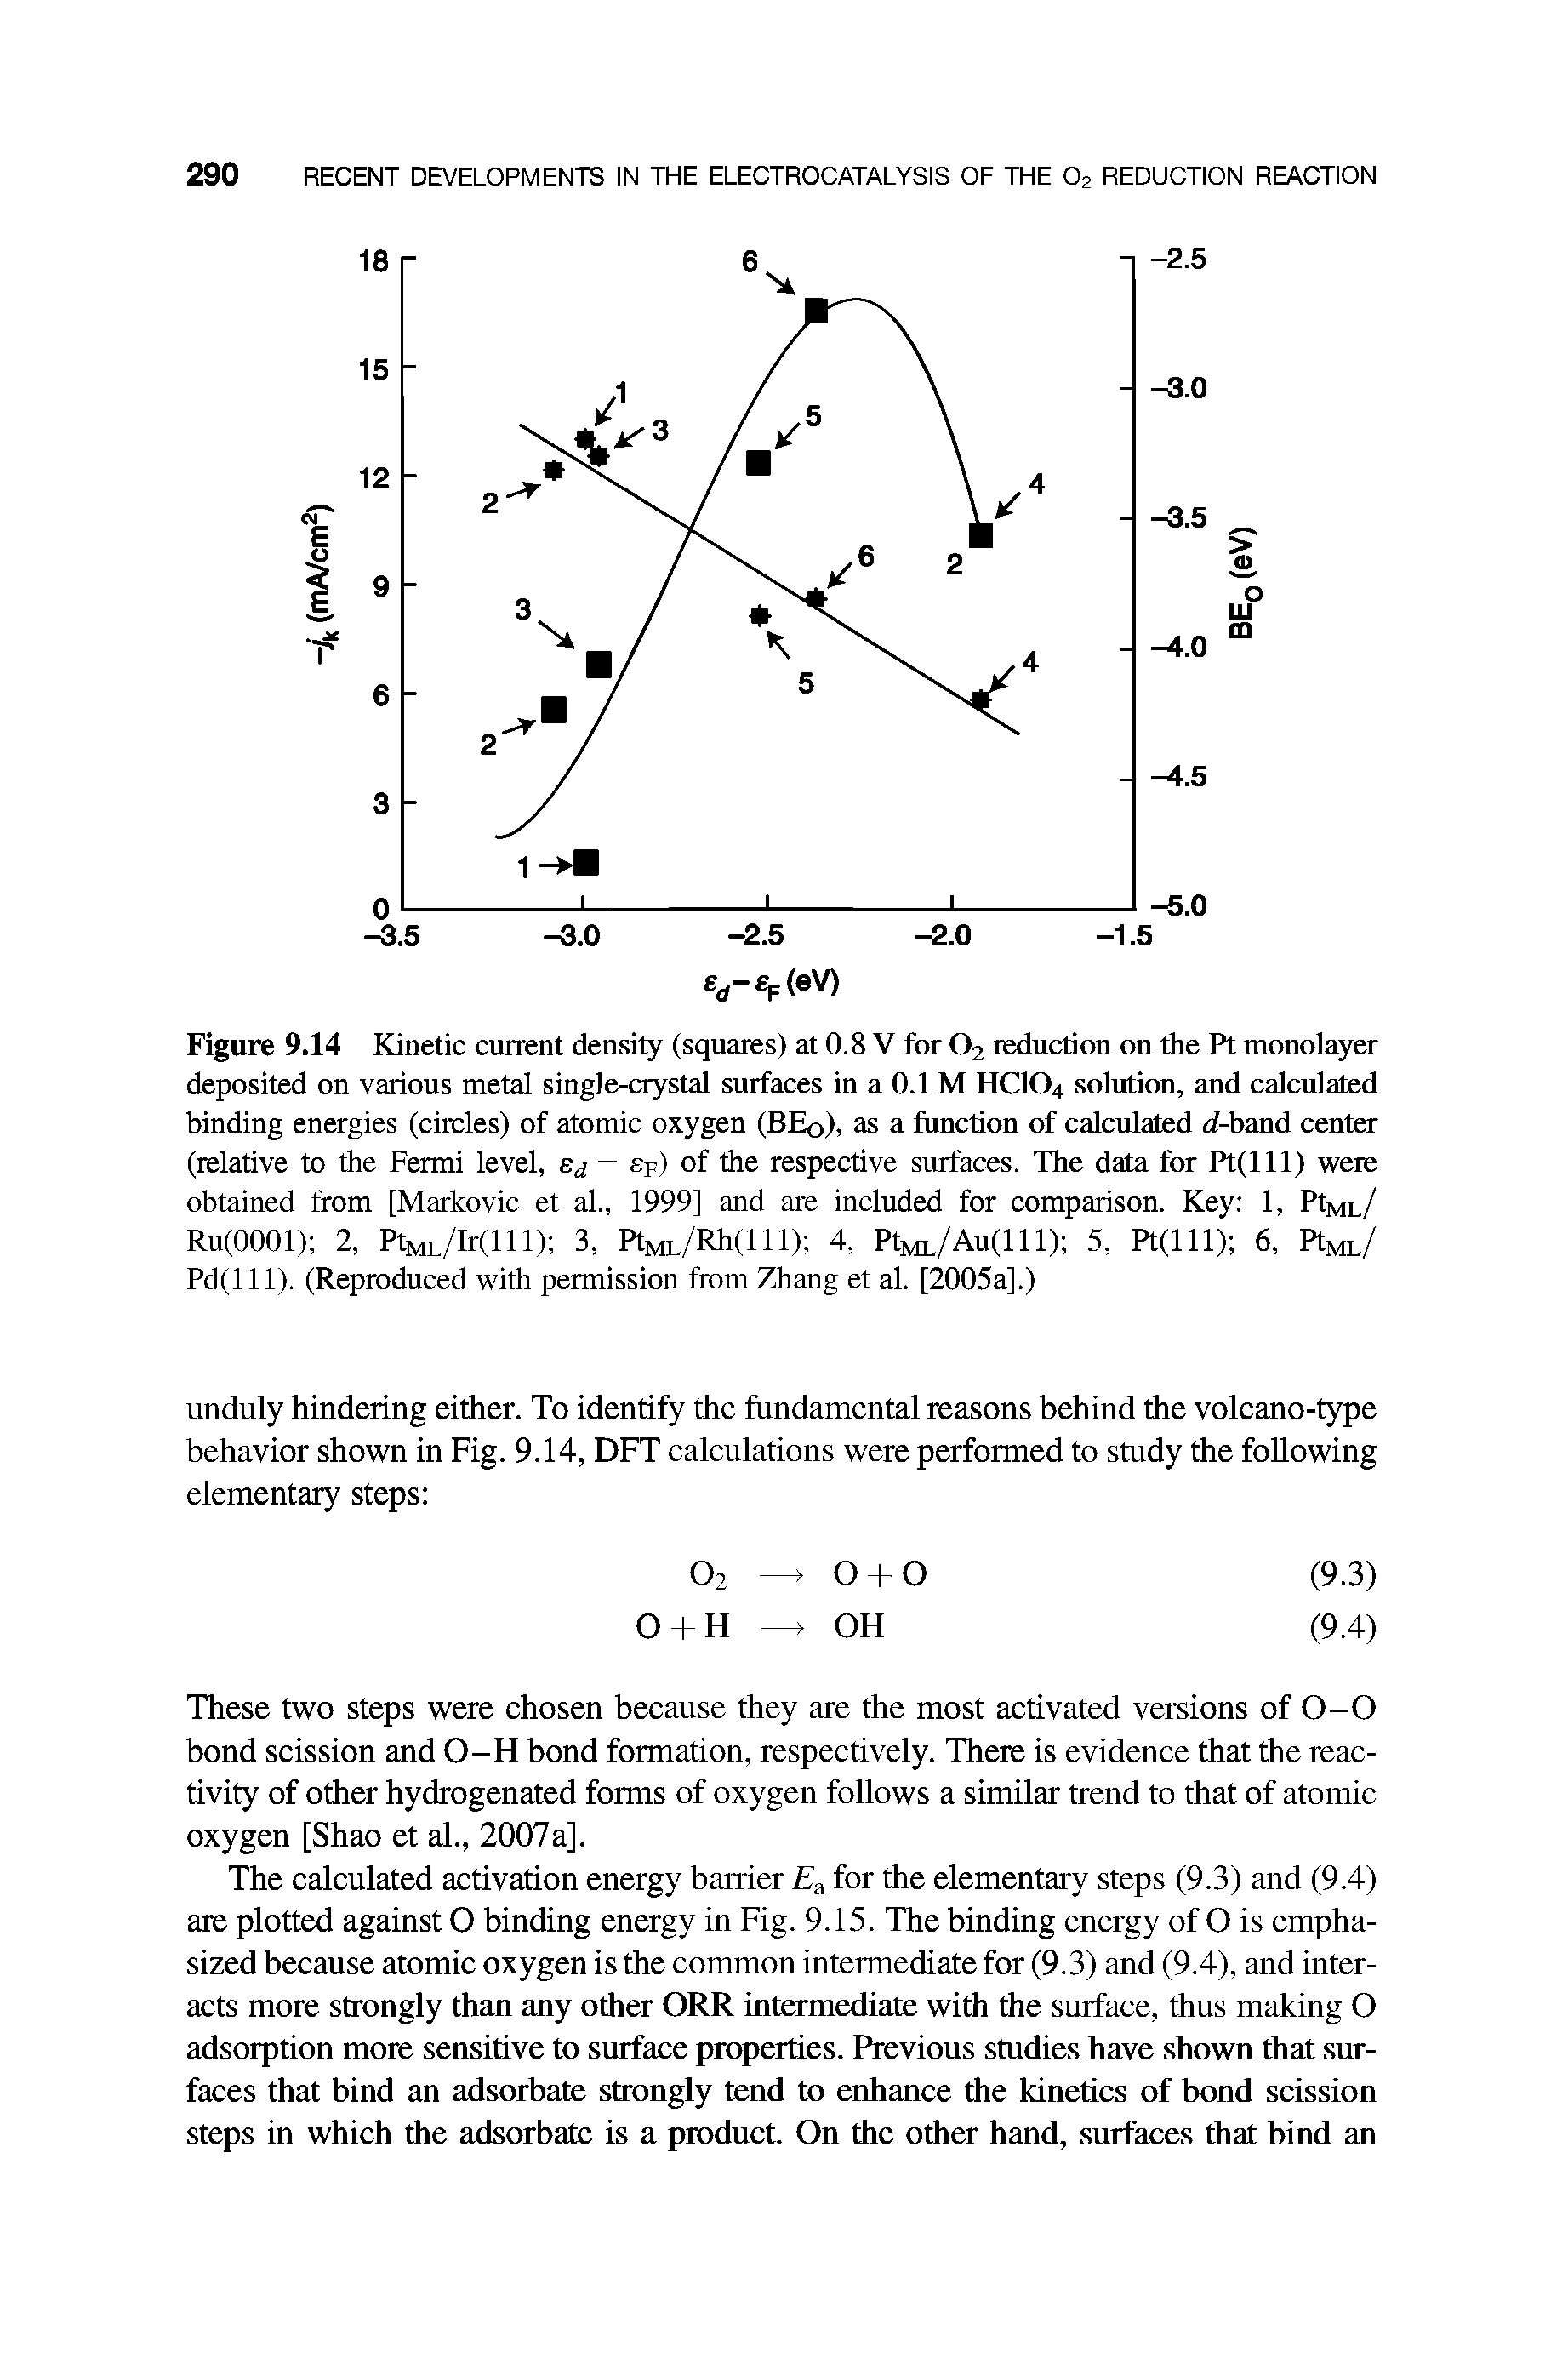 Figure 9.14 Kinetic current density (squares) at 0.8 V for O2 reduction on the Pt monolayer deposited on various metal single-crystal surfaces in a 0.1 M HCIO4 solution, and calculated binding energies (circles) of atomic oxygen (BEq), as a function of calculated d-band center (relative to the Fermi level, ej — sp) of the respective surfaces. The data for Pt(lll) were obtained from [Markovic et al., 1999] and are included for comparison. Key 1, PIml/ Ru(OOOl) 2, PtML/Ir(lll) 3, PtML/Rh(lH) 4, PtML/Au(lll) 5, Pt(lll) 6, PIml/ Pd(lll). (Reproduced with permission from Zhang et al. [2005a].)...